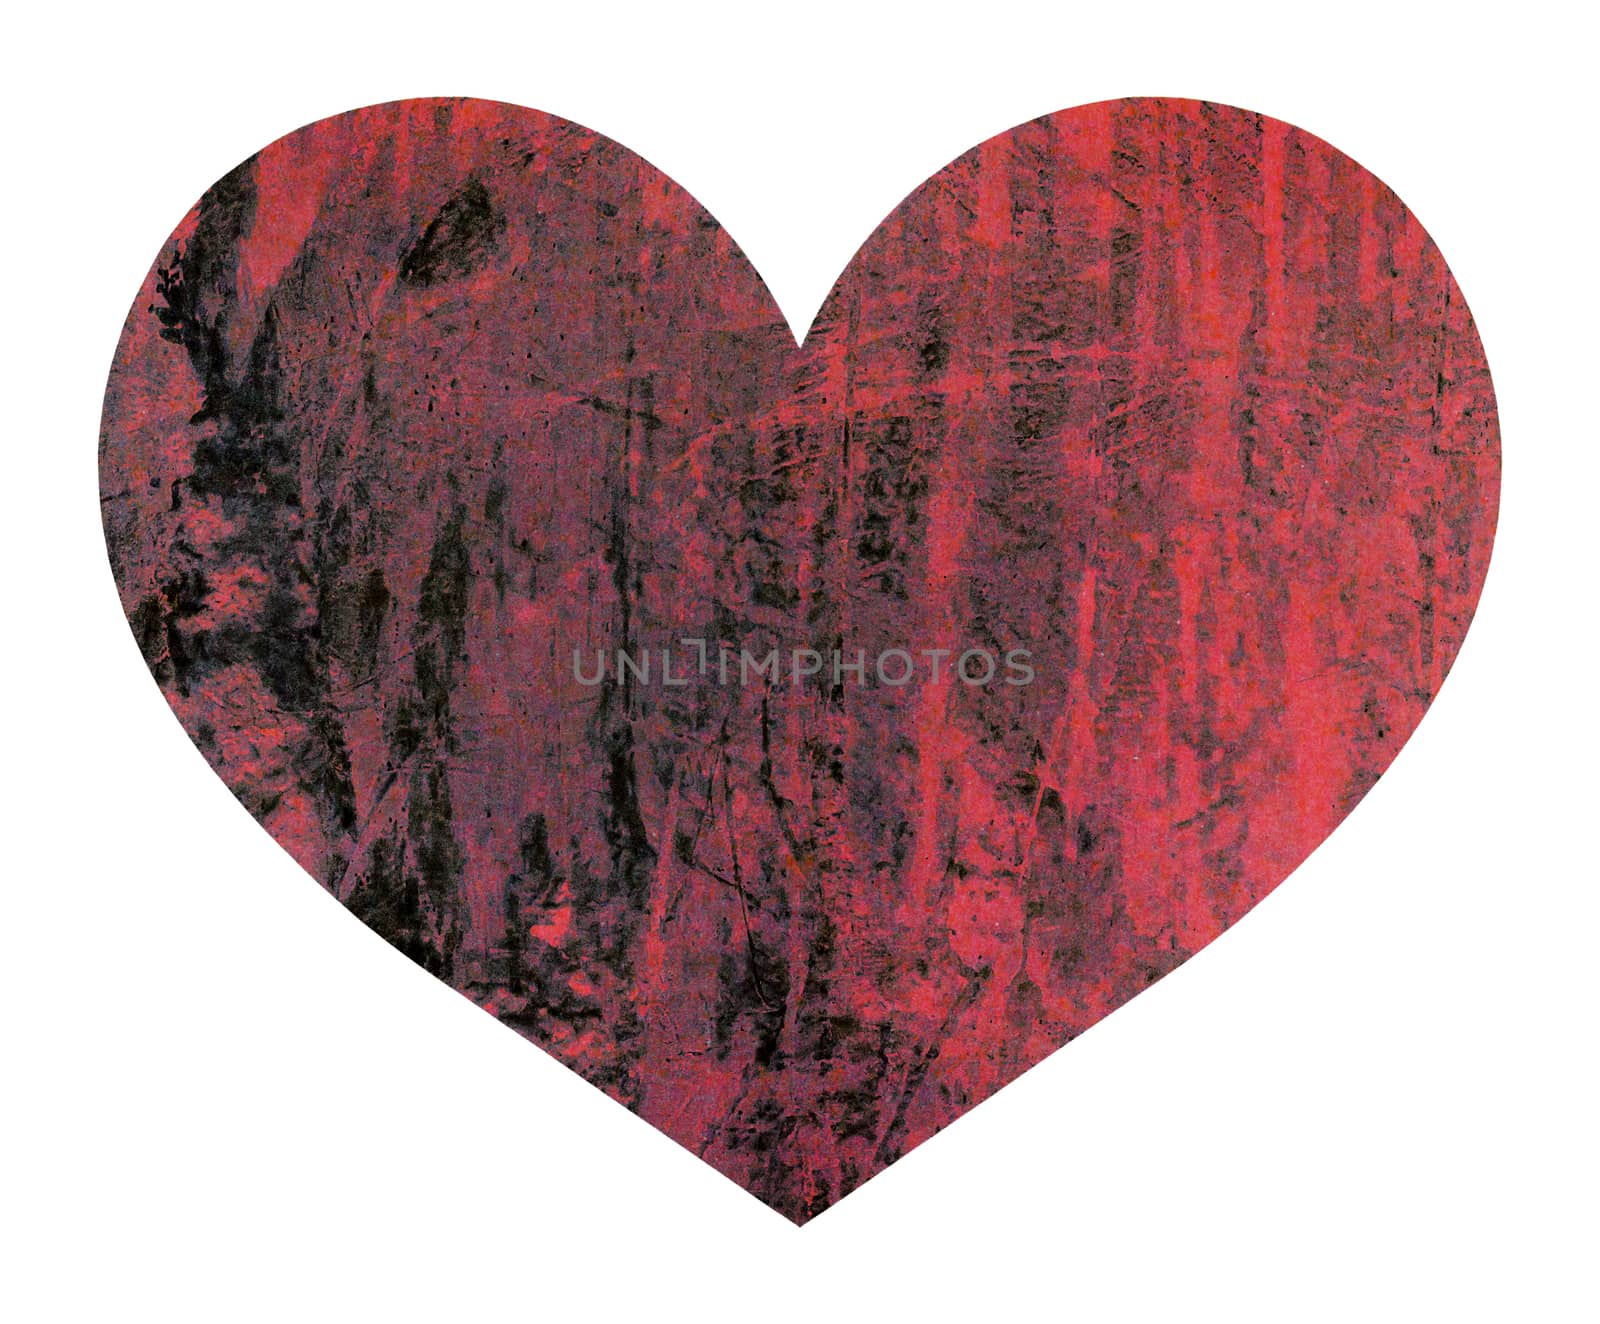 Isolate vintage red heart on white background, valentine day concept